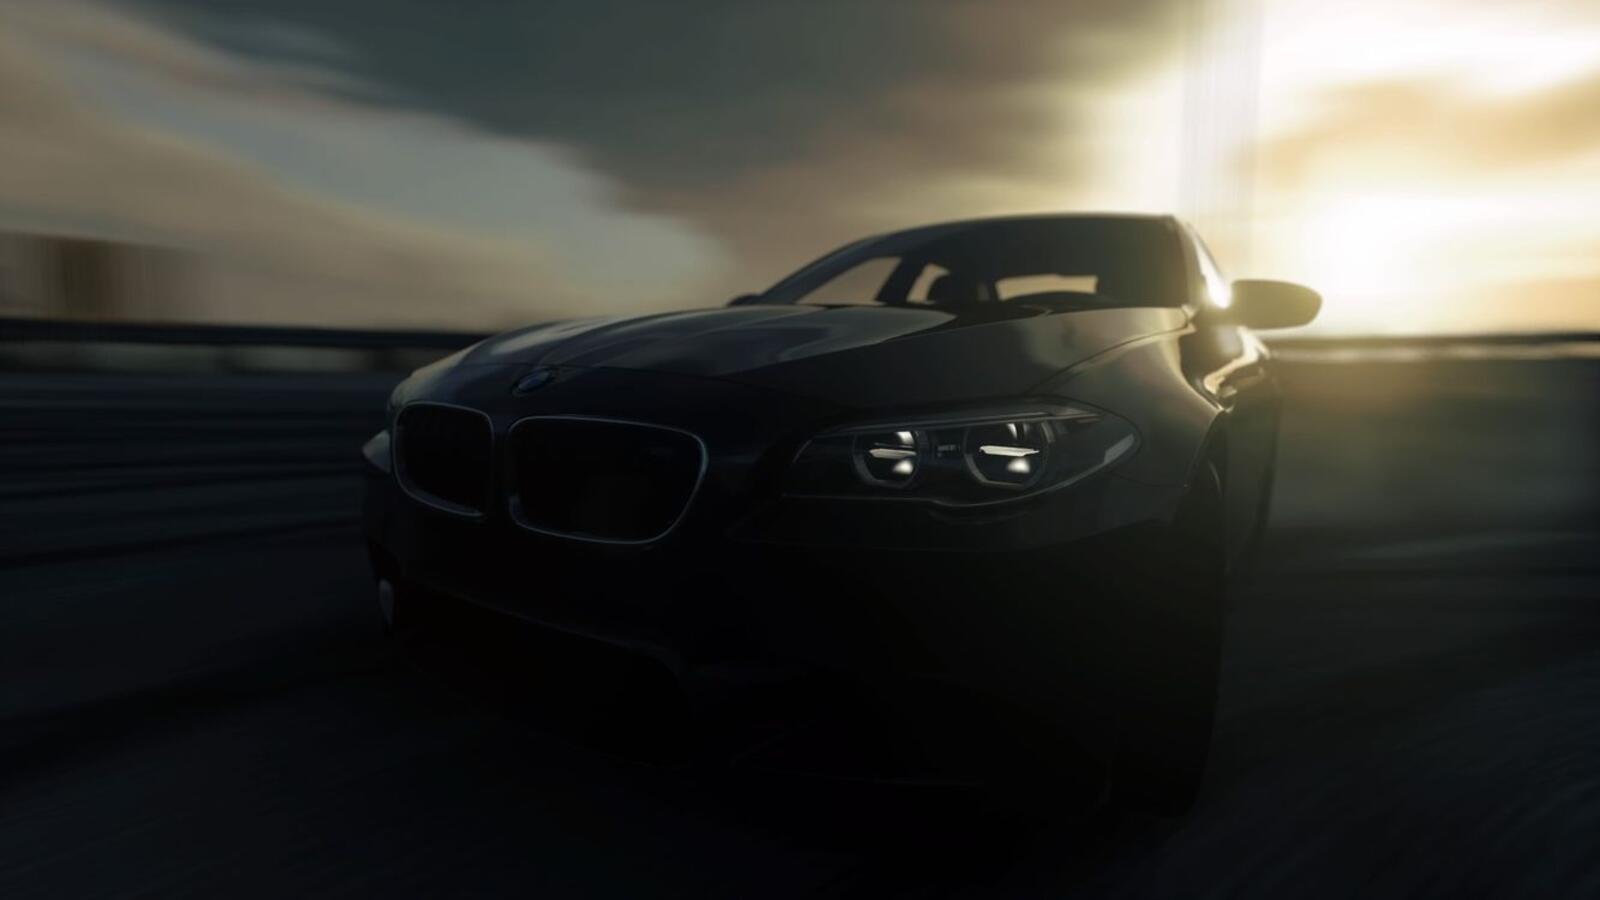 Wallpapers driveclub BMW M5 black on the desktop